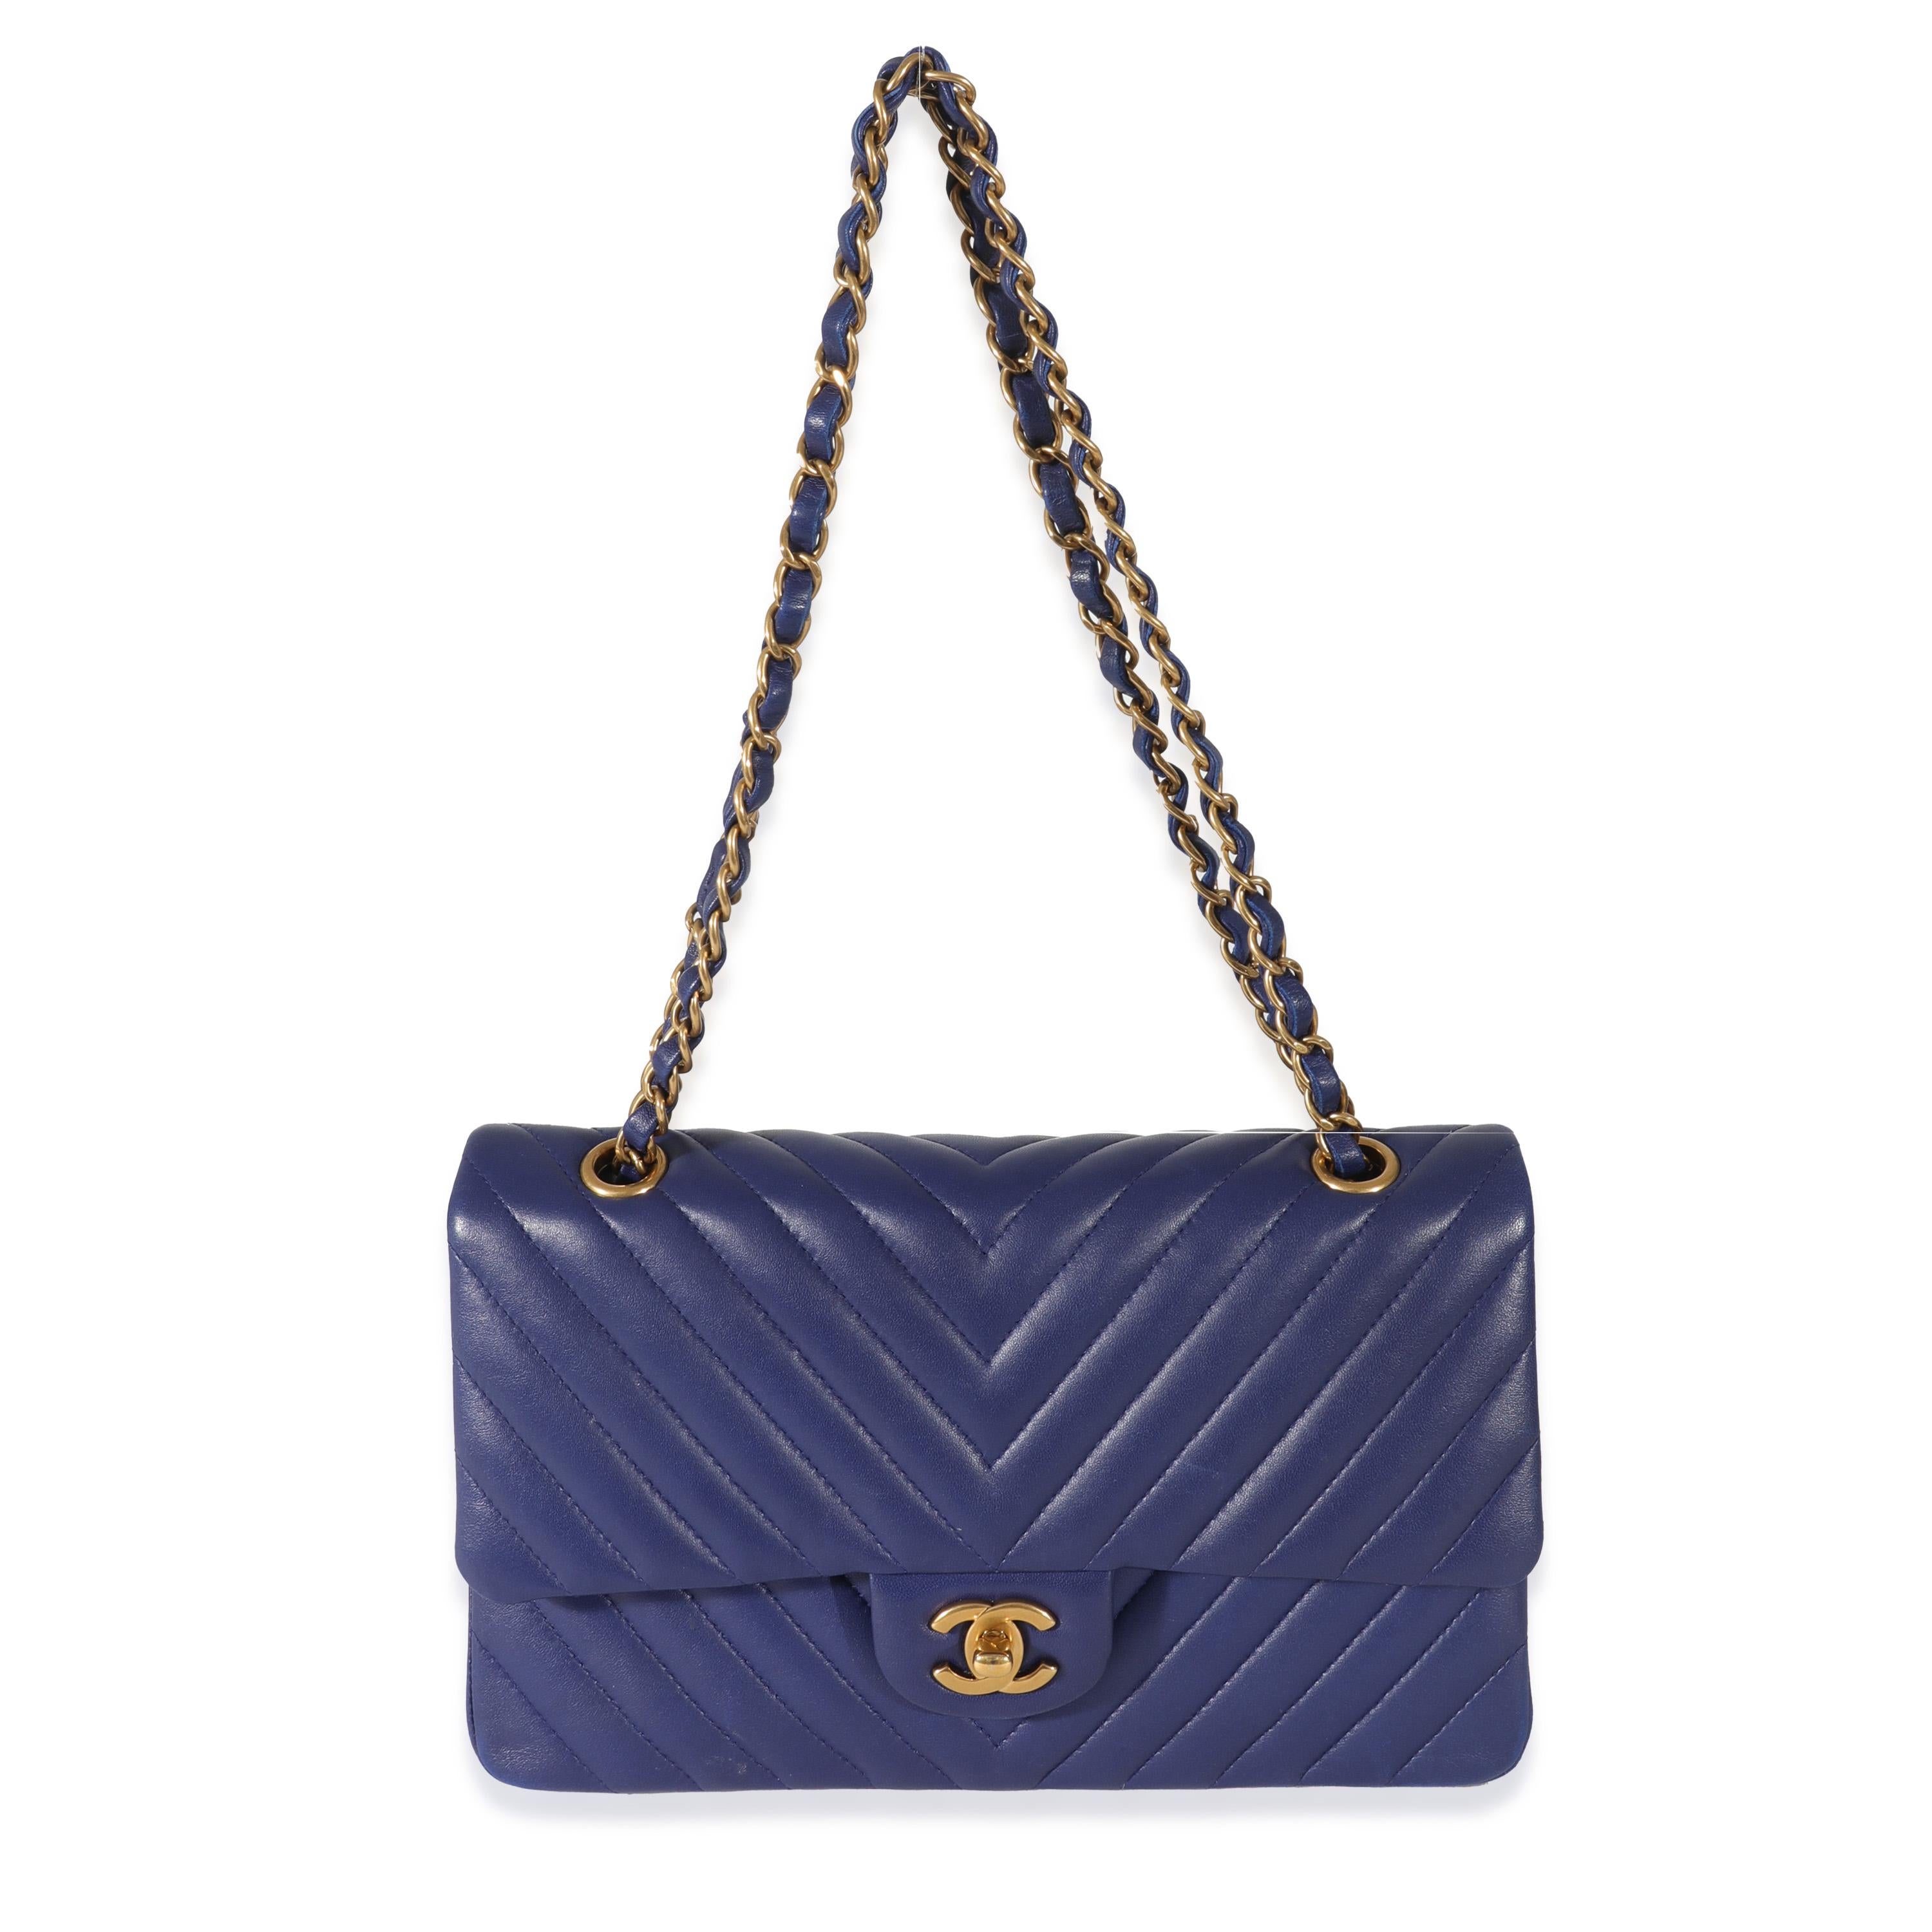 Listing Title: Chanel Navy Chevron Medium Classic Double Flap
SKU: 130459
MSRP: 10200.00
Condition: Pre-owned 
Condition Description: A timeless classic that never goes out of style, the flap bag from Chanel dates back to 1955 and has seen a number